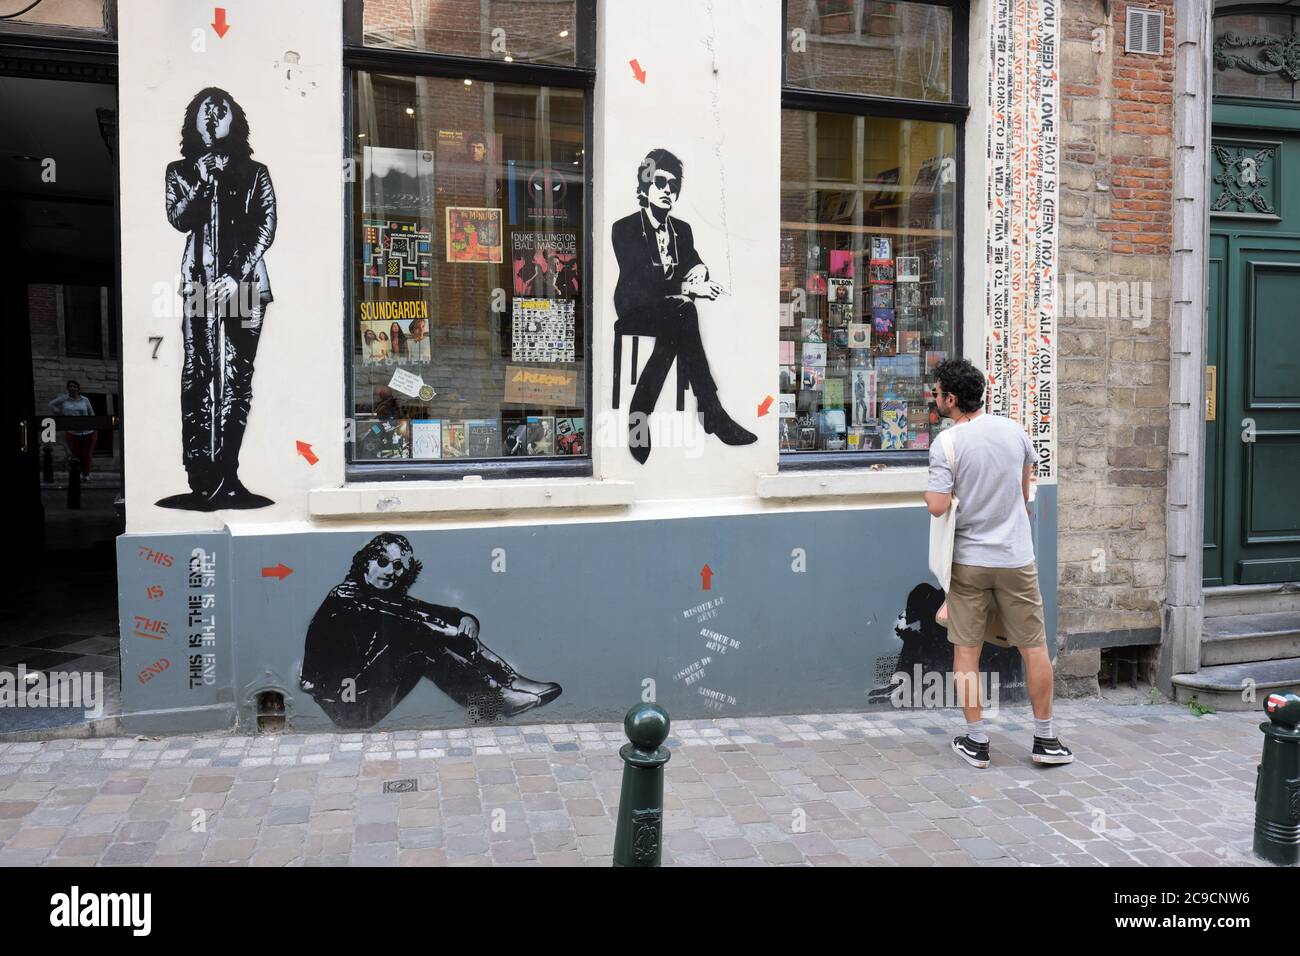 Brussels, Belgium a passer by stops to browse in a record store window display that is also covered in stencil art of famous pop rock stars July 2020. Stock Photo